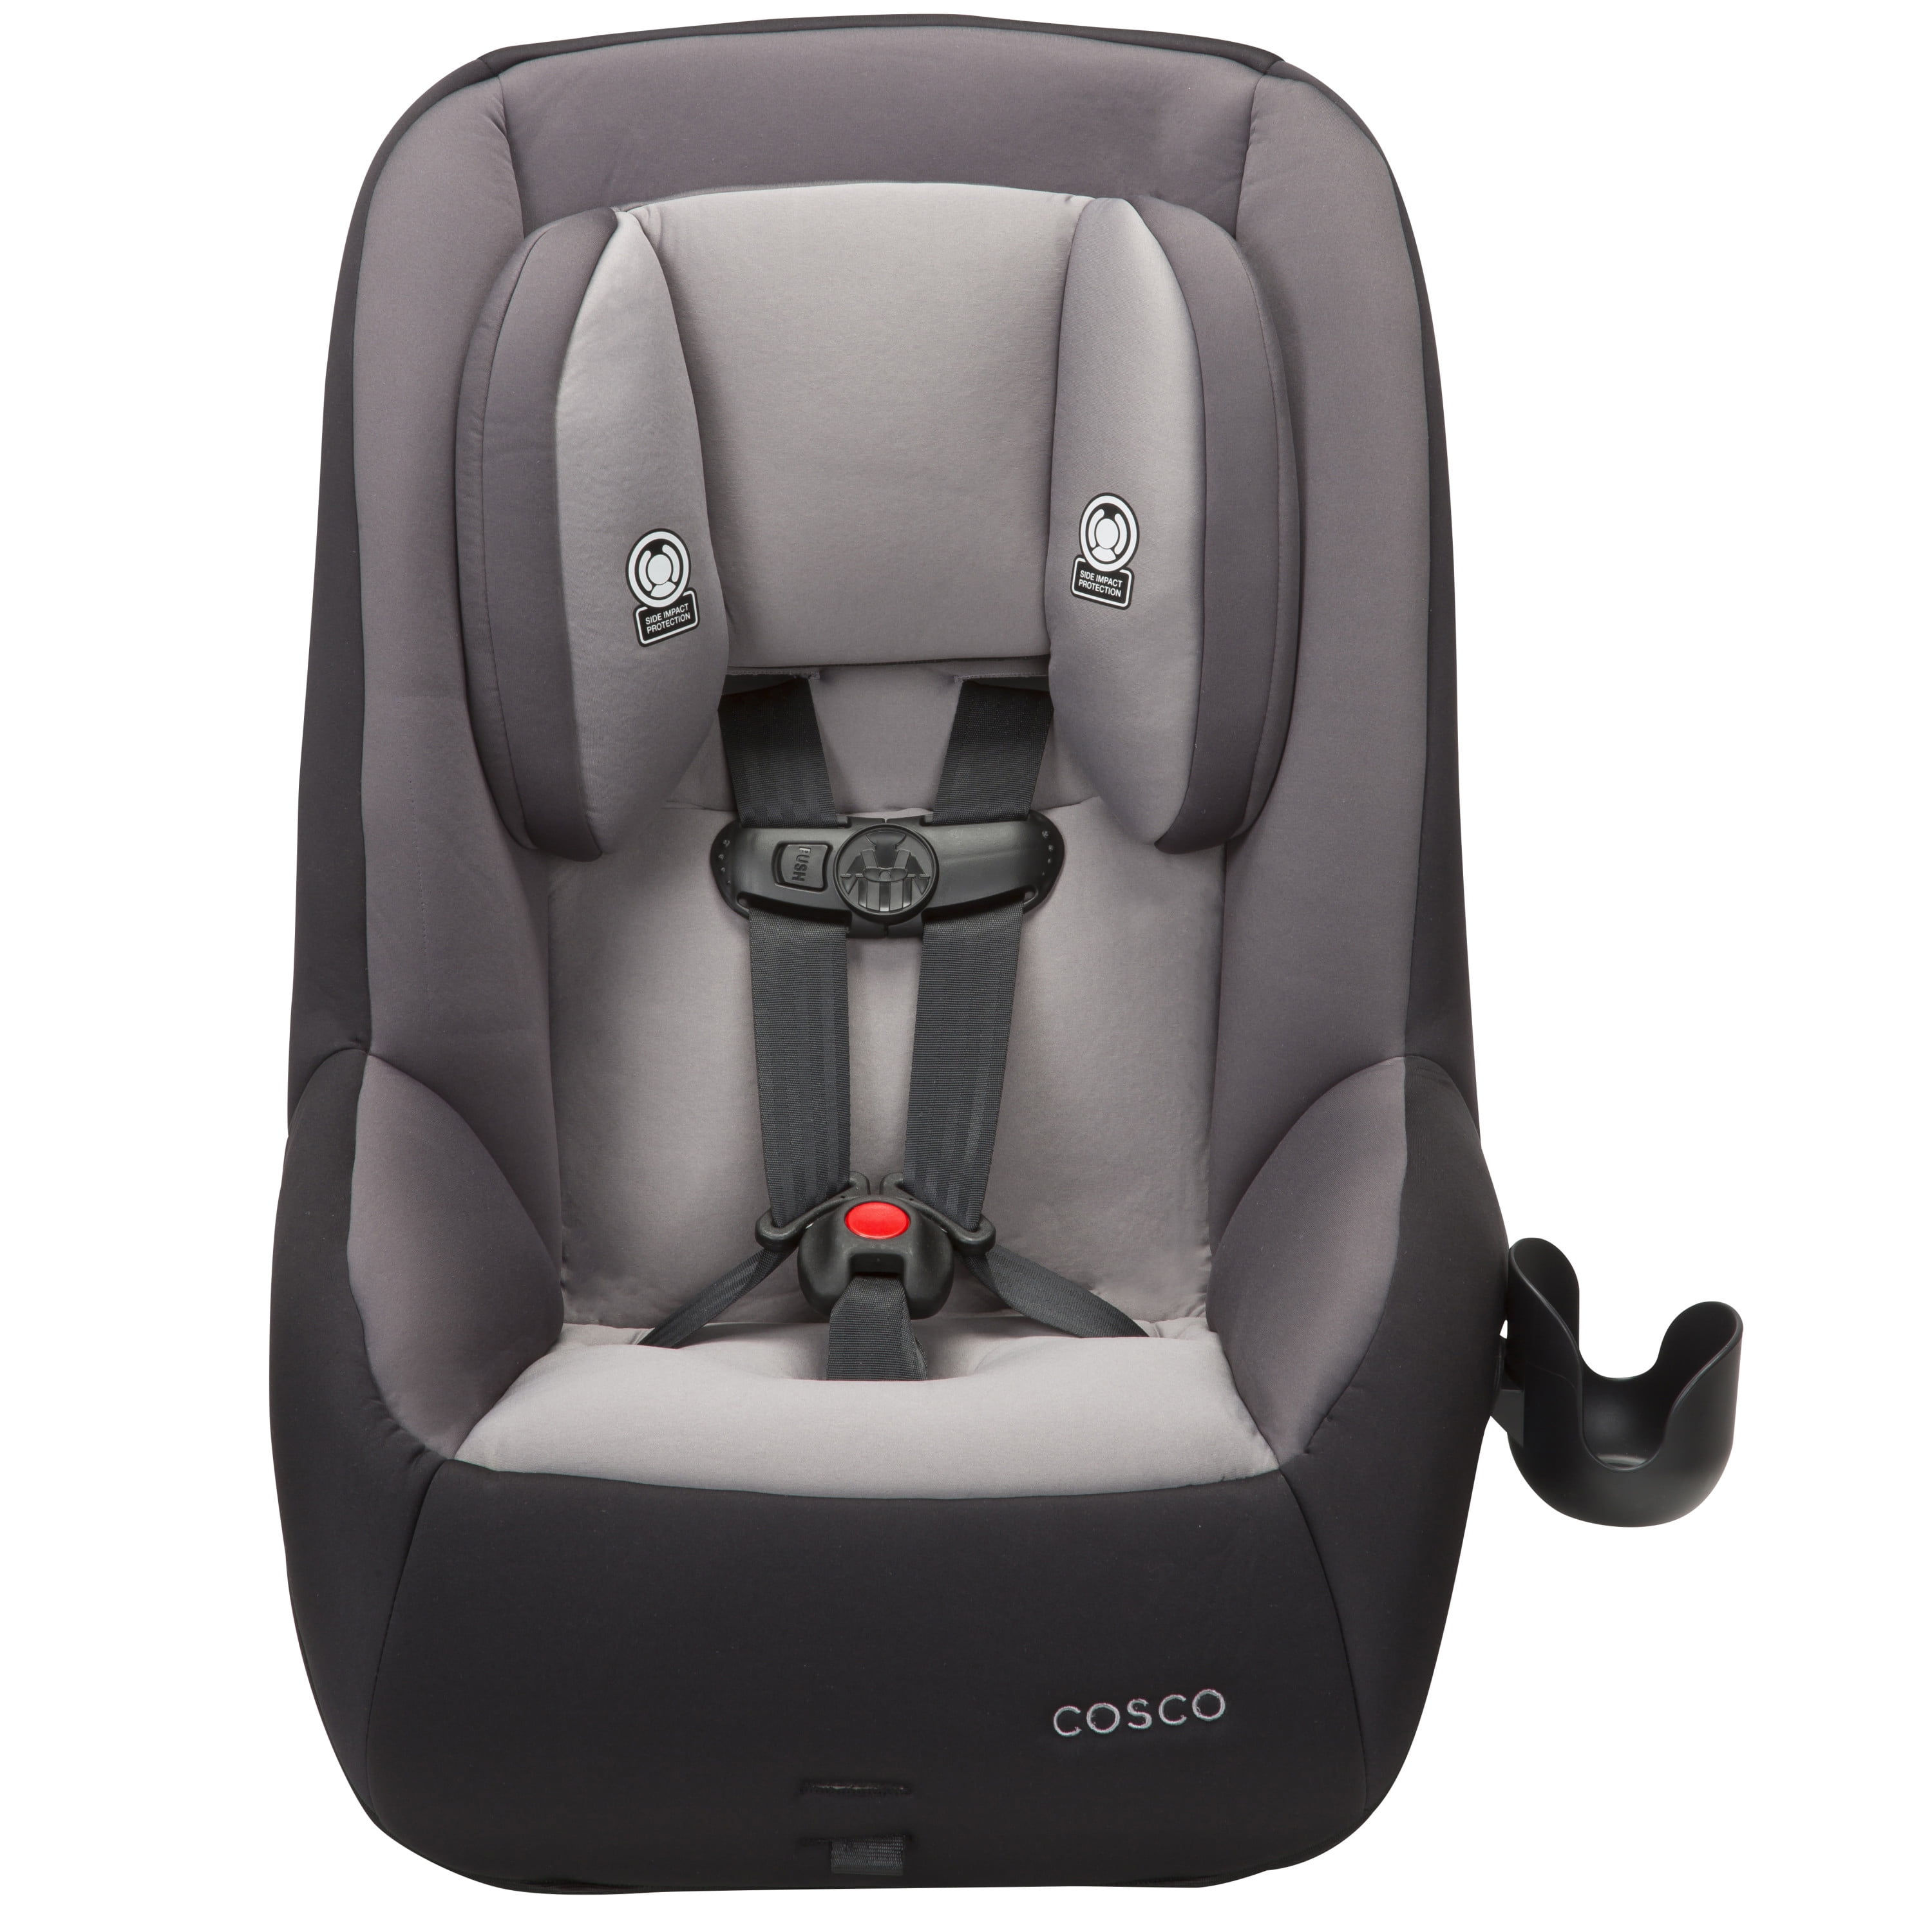 double stroller that fits cosco car seat